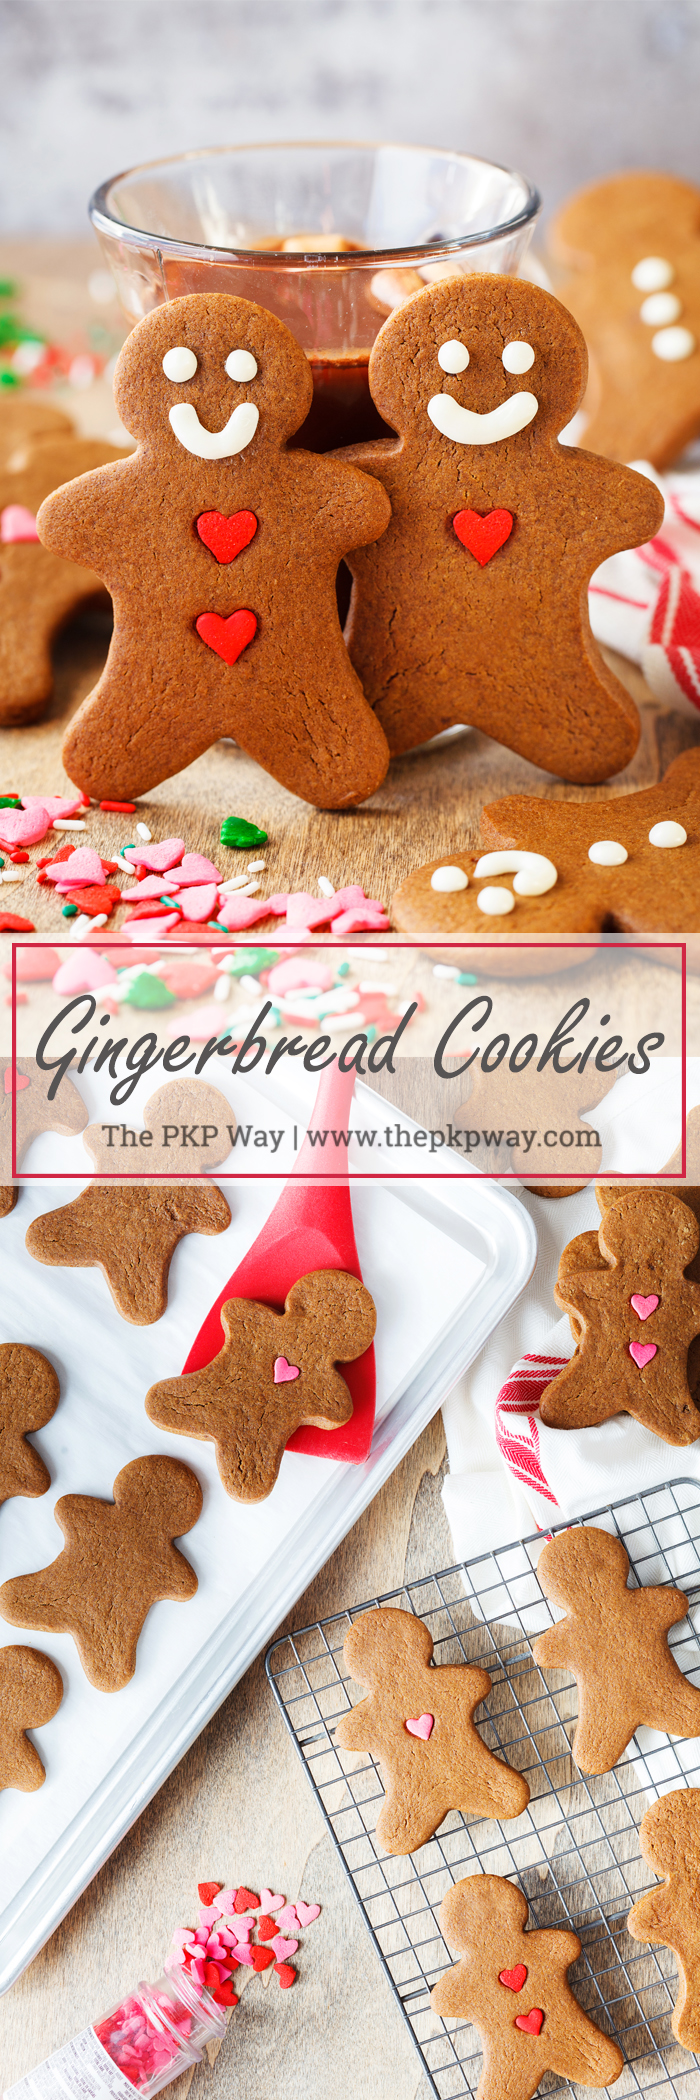 Look no further for your go-to gingerbread cookie recipe. This recipe yields thick, chewy, and spicy gingerbread cookies that is perfect for decorating, gifting, and ornament-making!